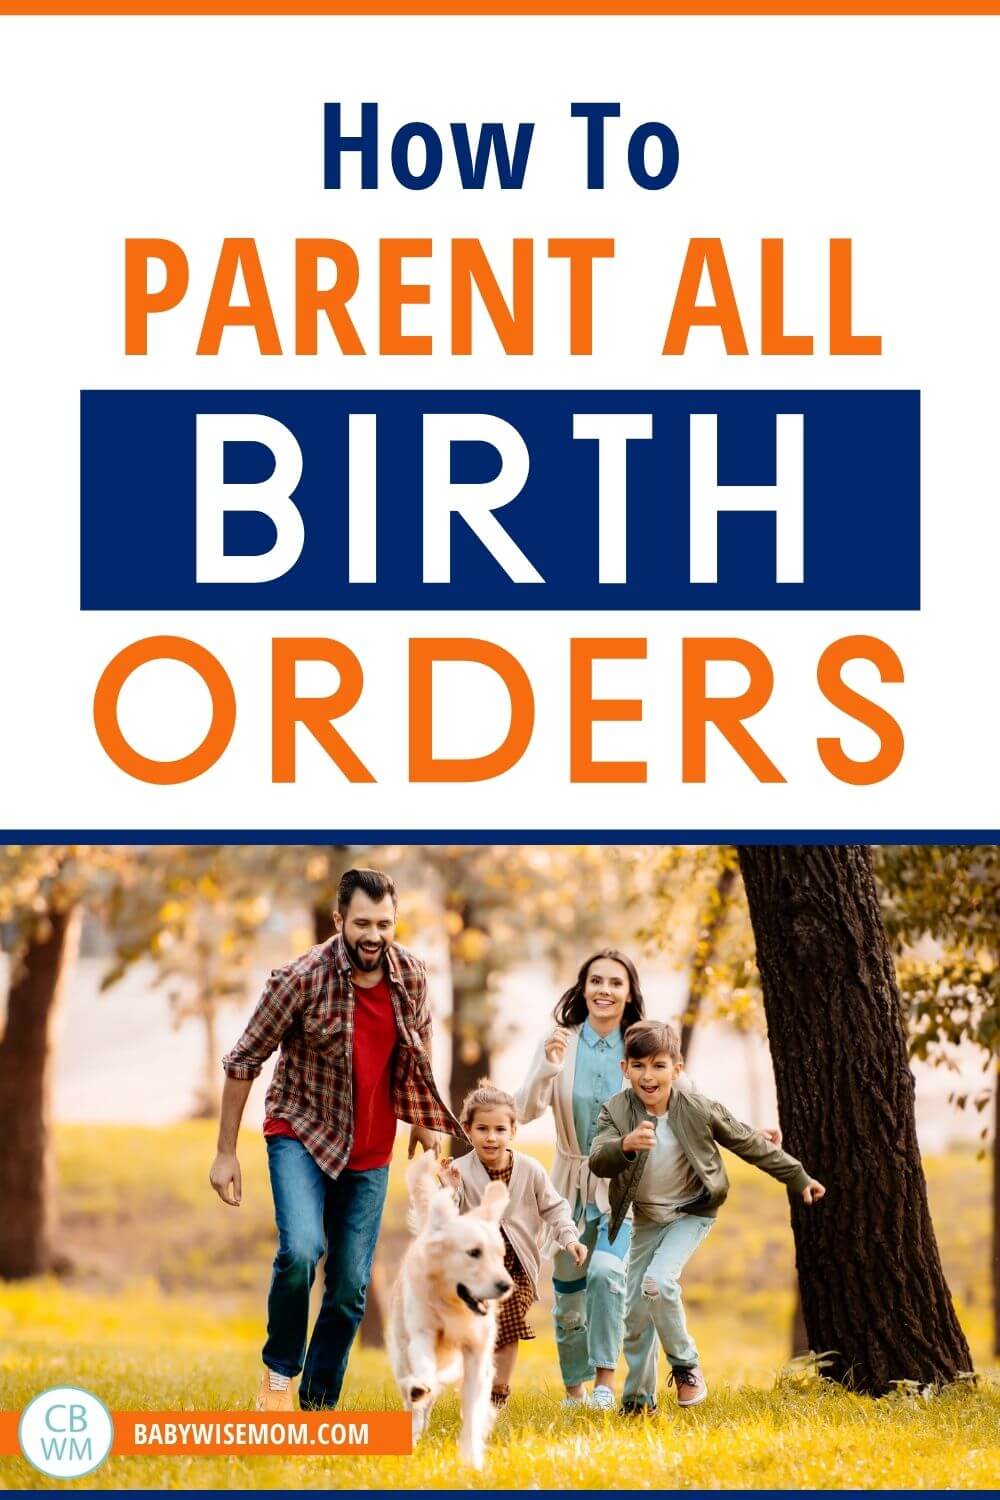 How to parent all birth orders